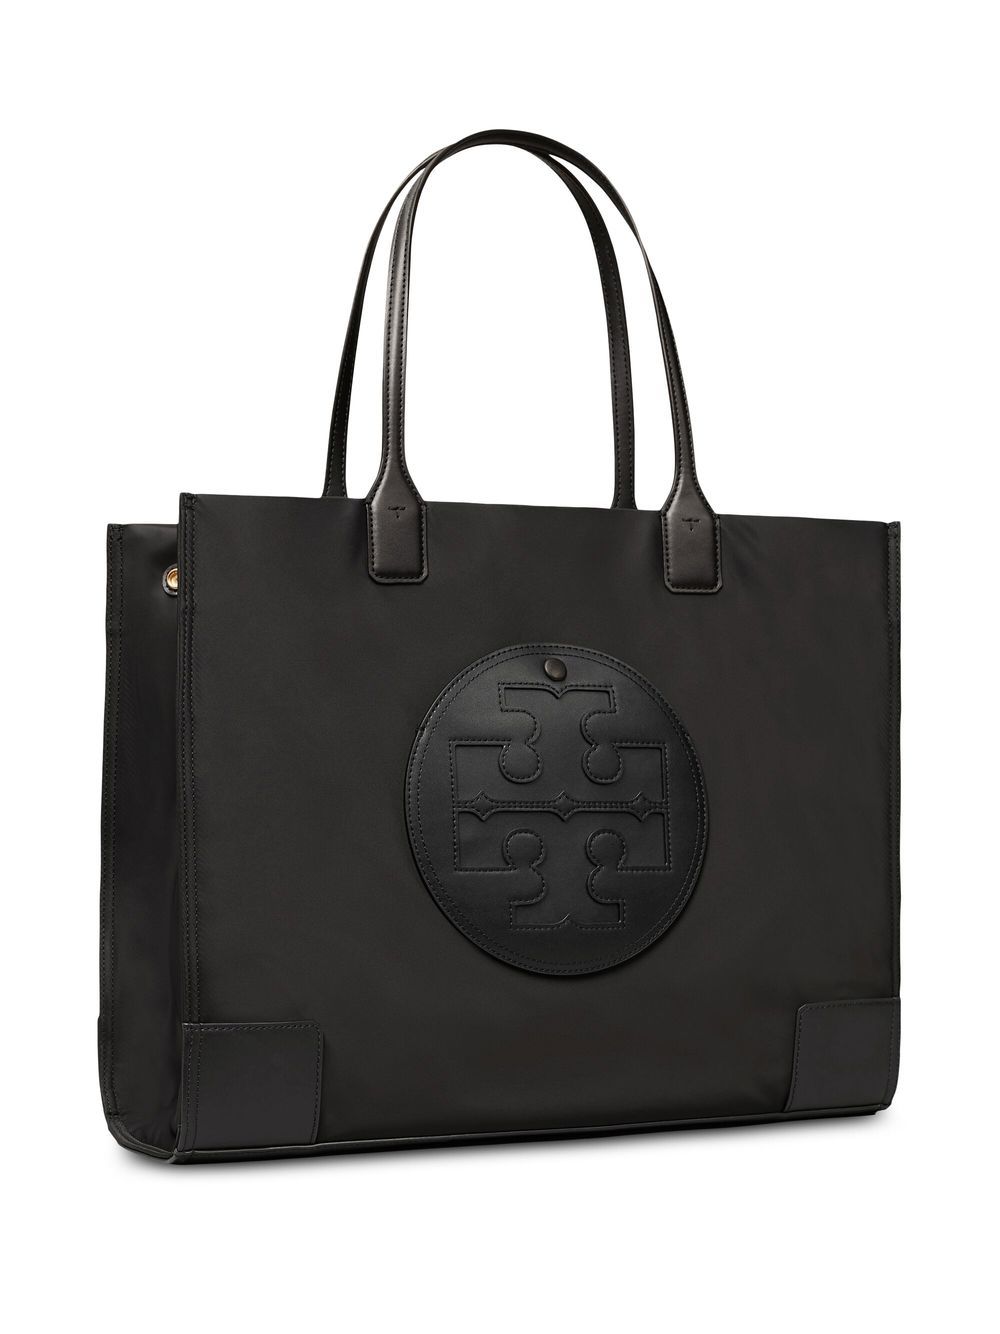 ecycled nylon, recycled polyester, artificial leather, embossed logo to the front, two top handles and open top.